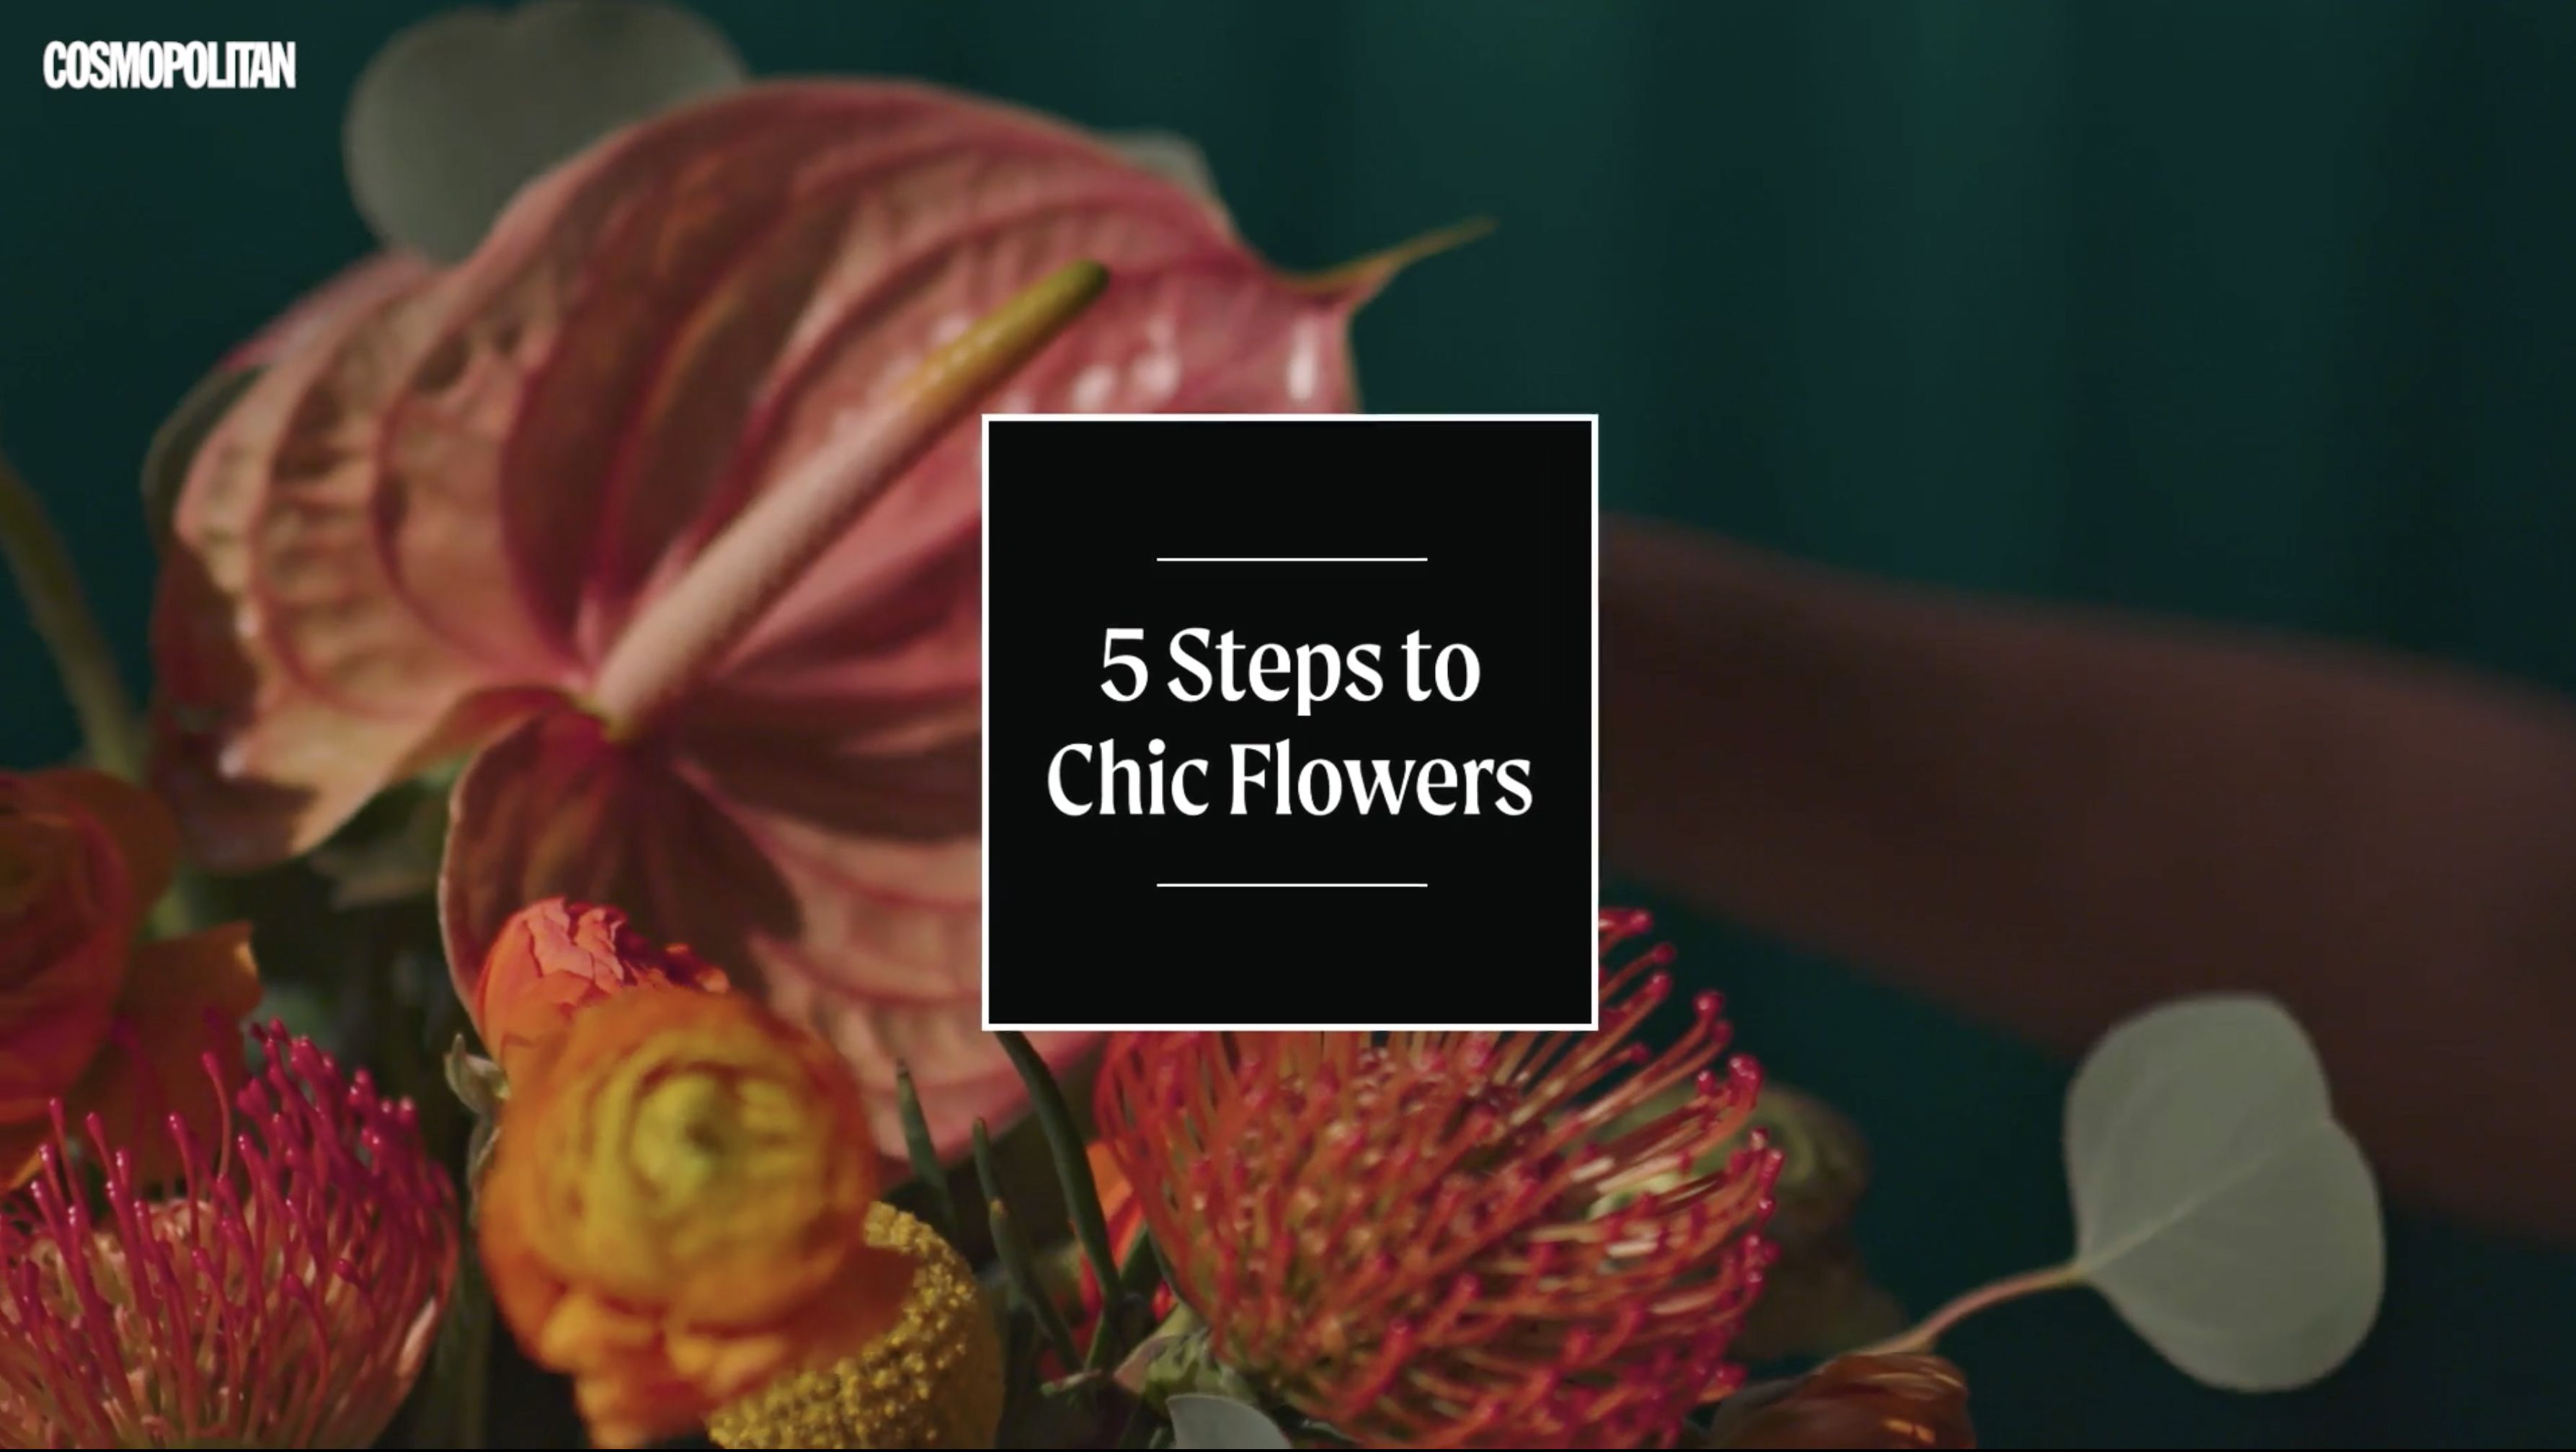 6 Easy Steps To DIY Wedding Bouquet On A Budget (With Videos)